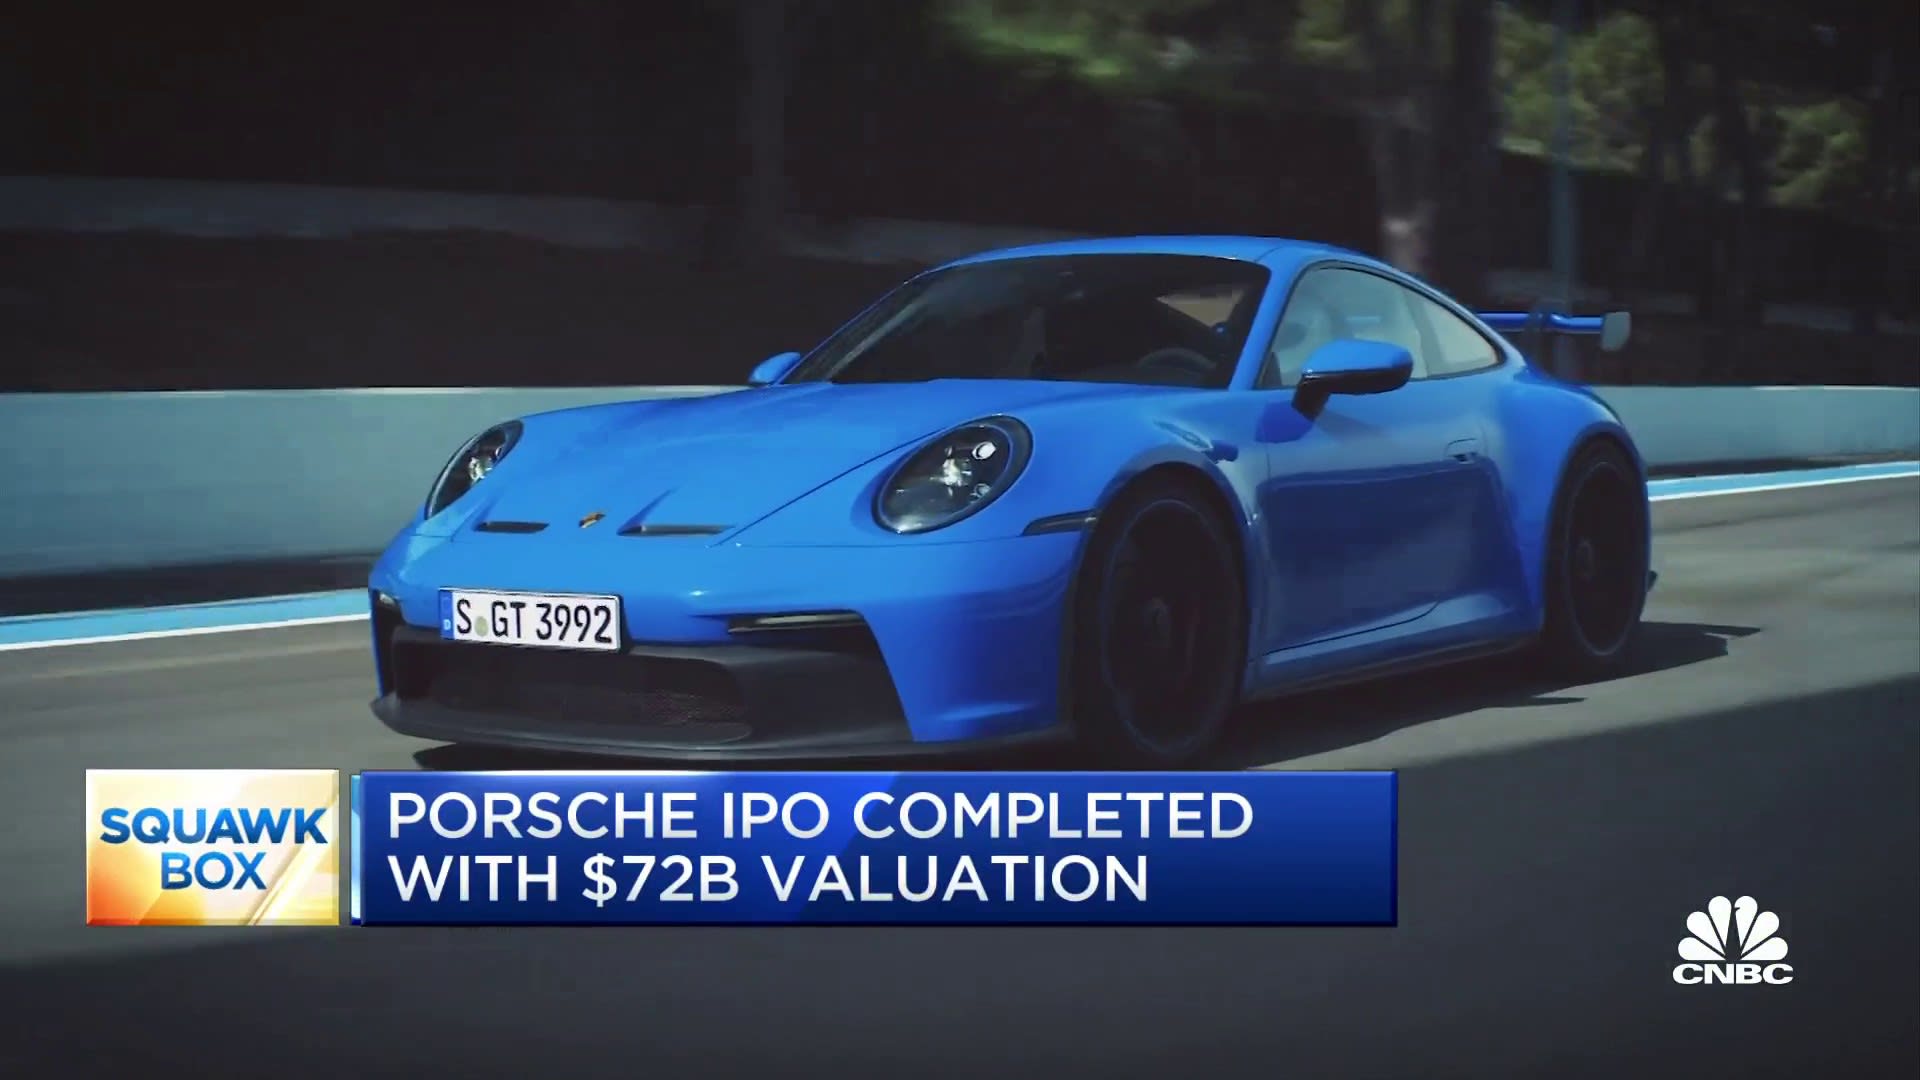 Porsche IPO completed with $72 billion valuation